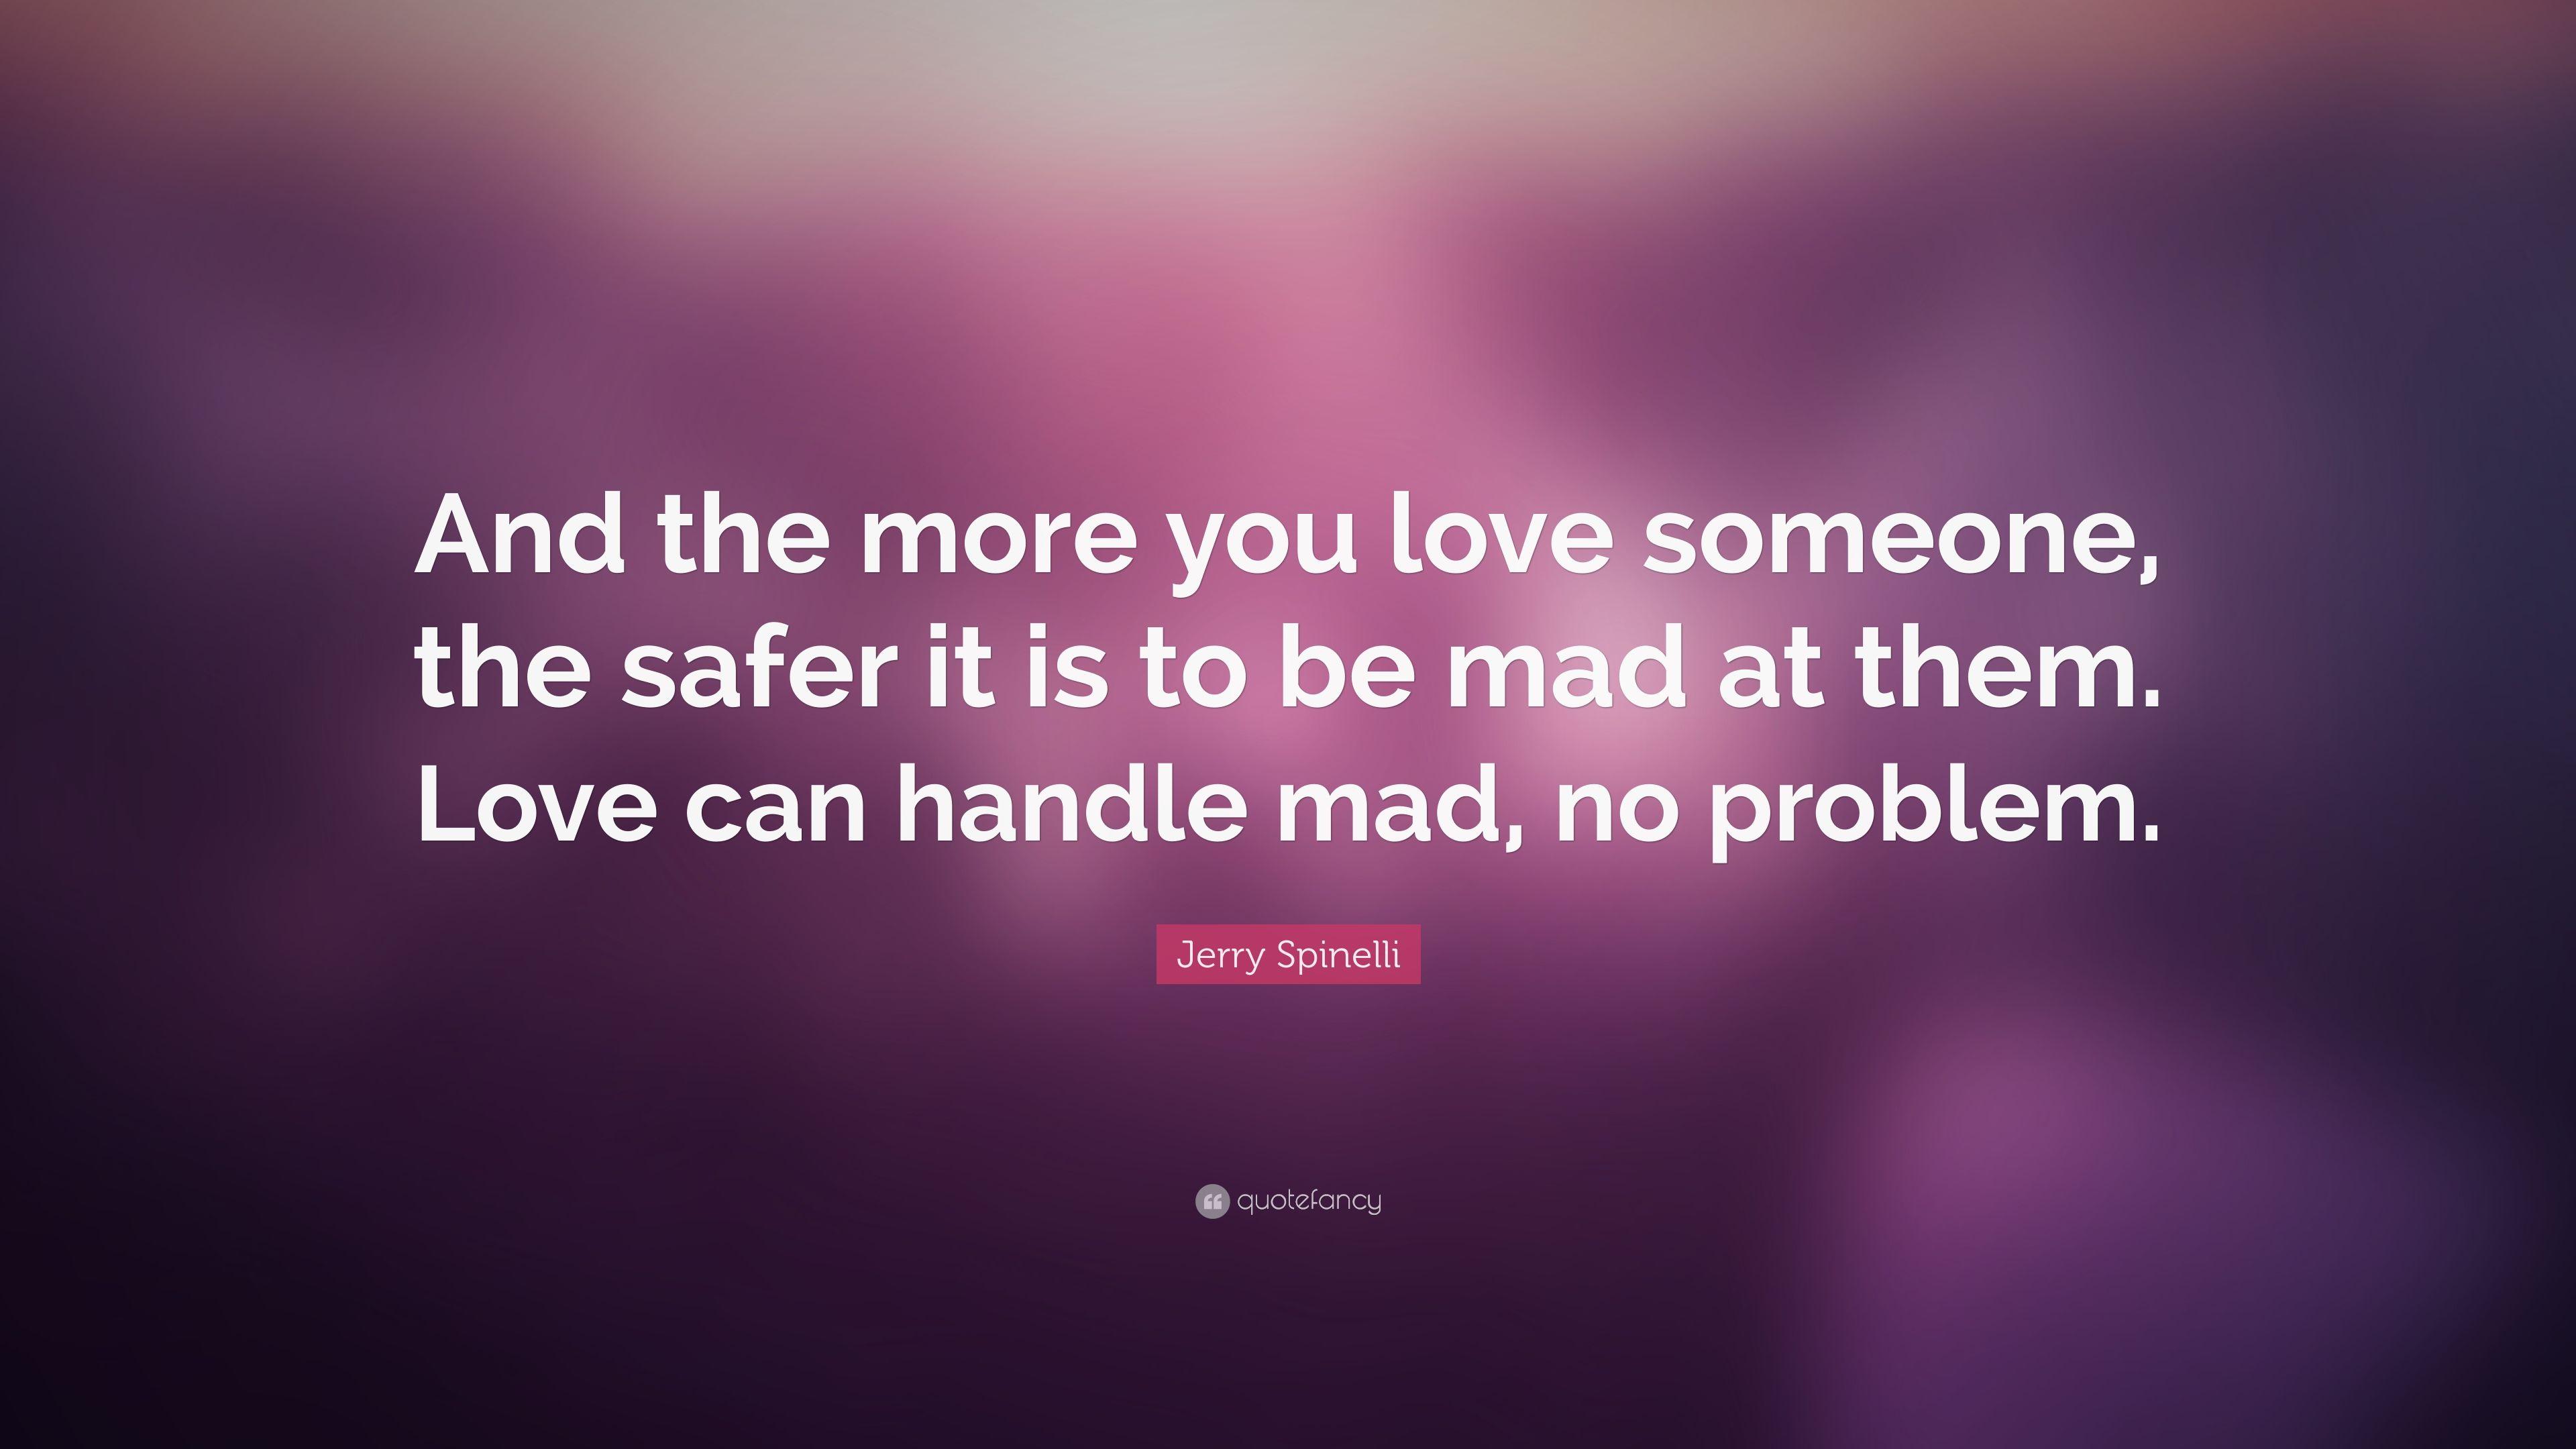 Jerry Spinelli Quote: “And the more you love someone, the safer it